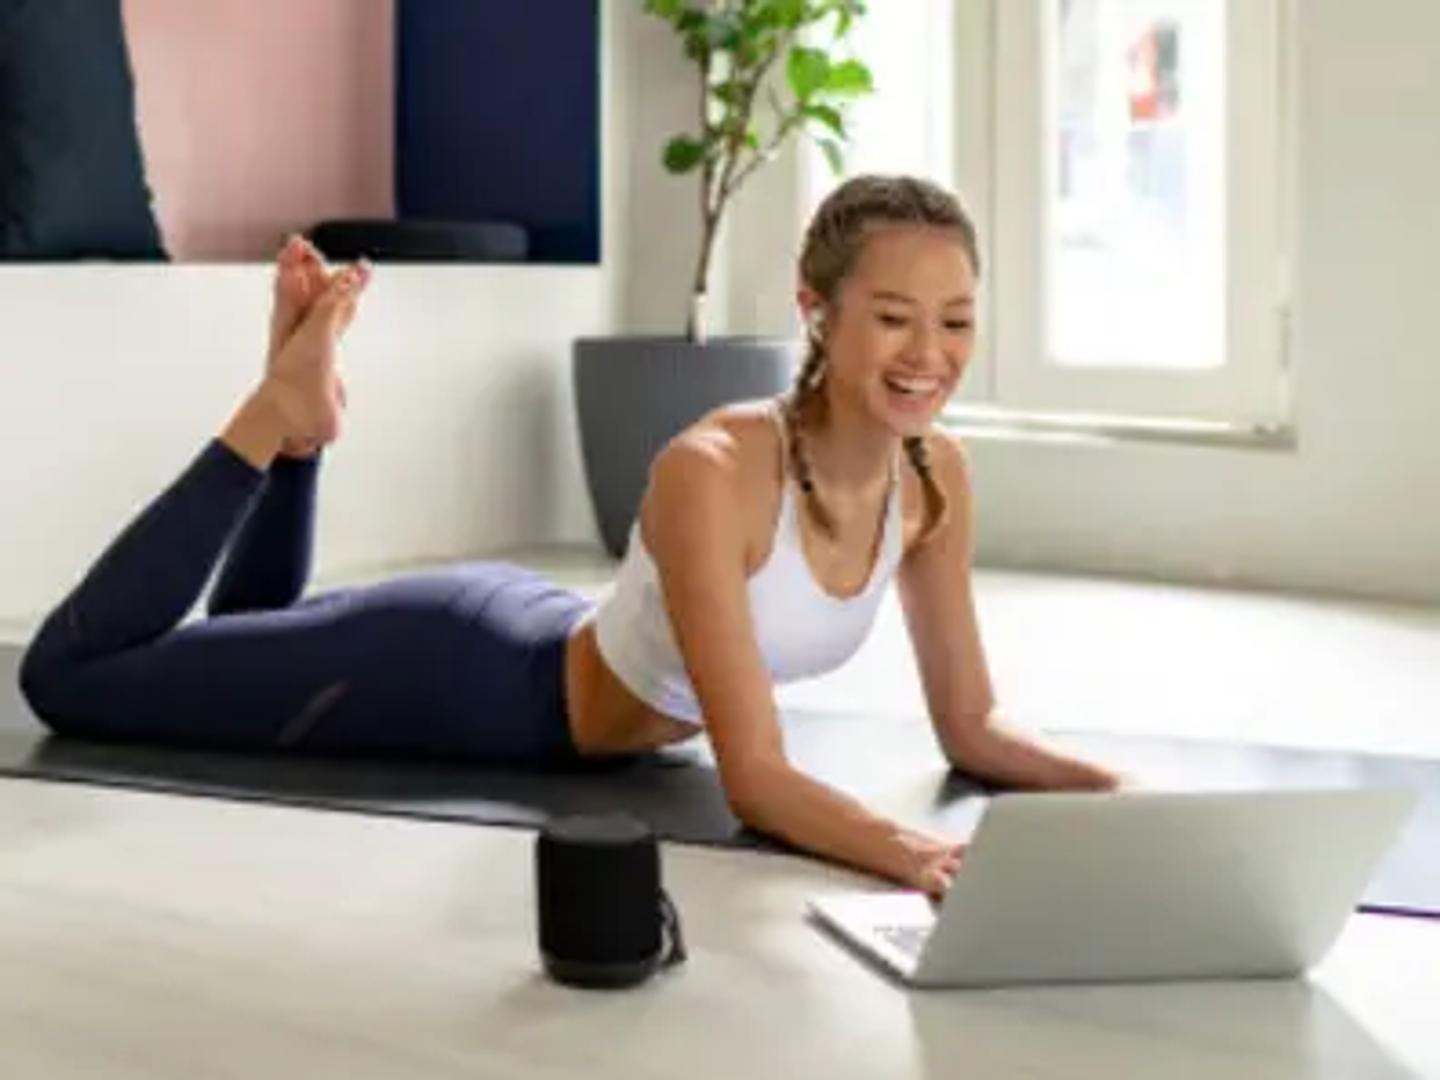 Yoga Instructor leading a class in front a laptop